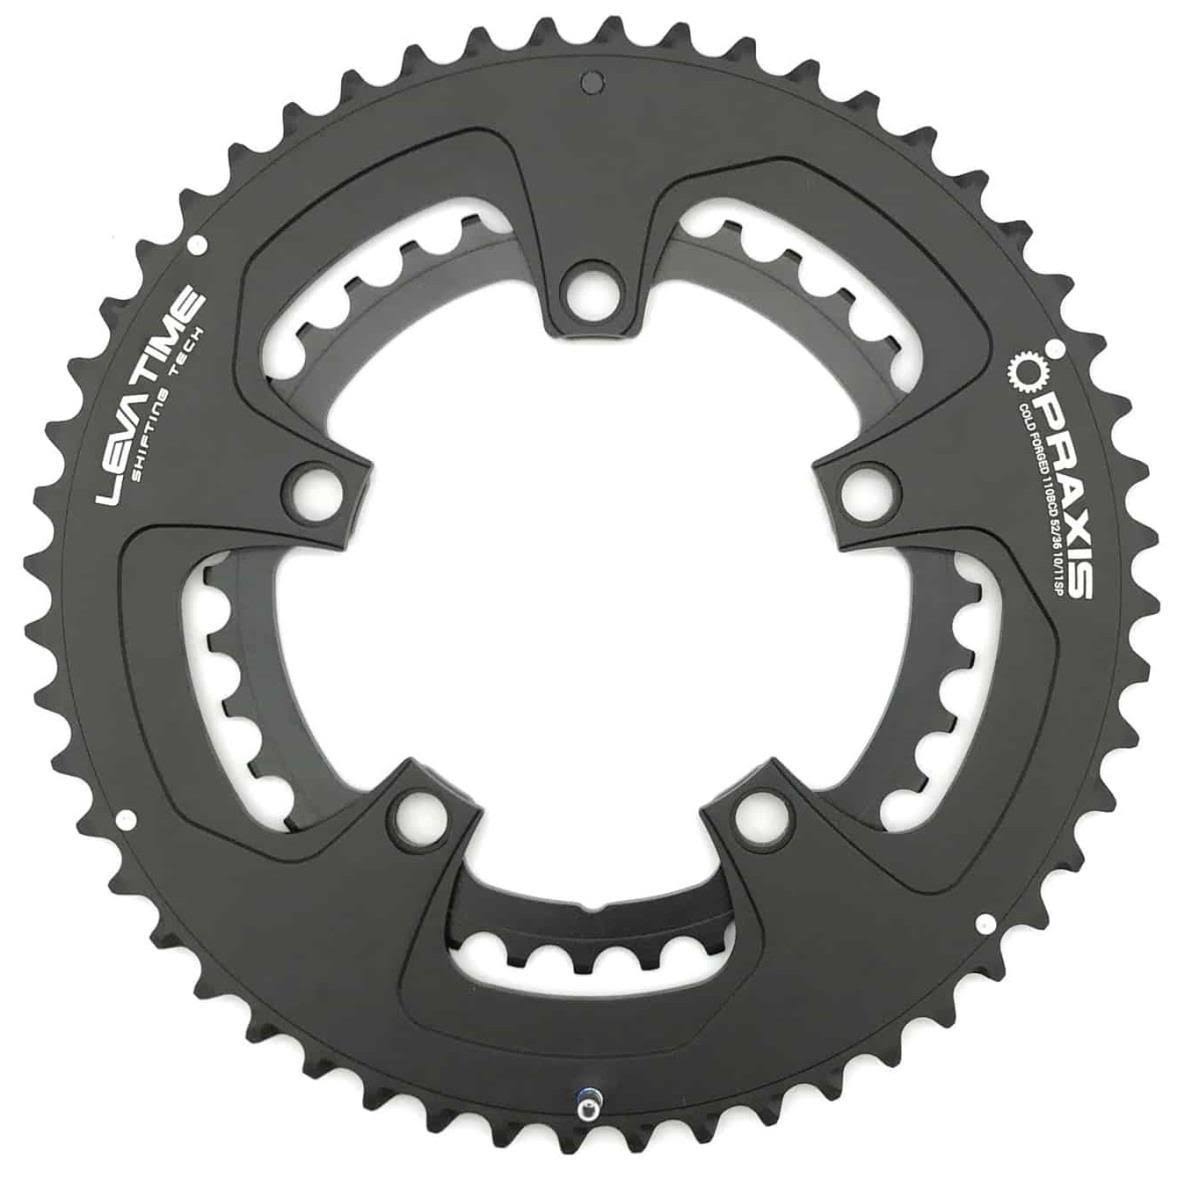 Praxis Works BUZZ Chainrings 52/36T